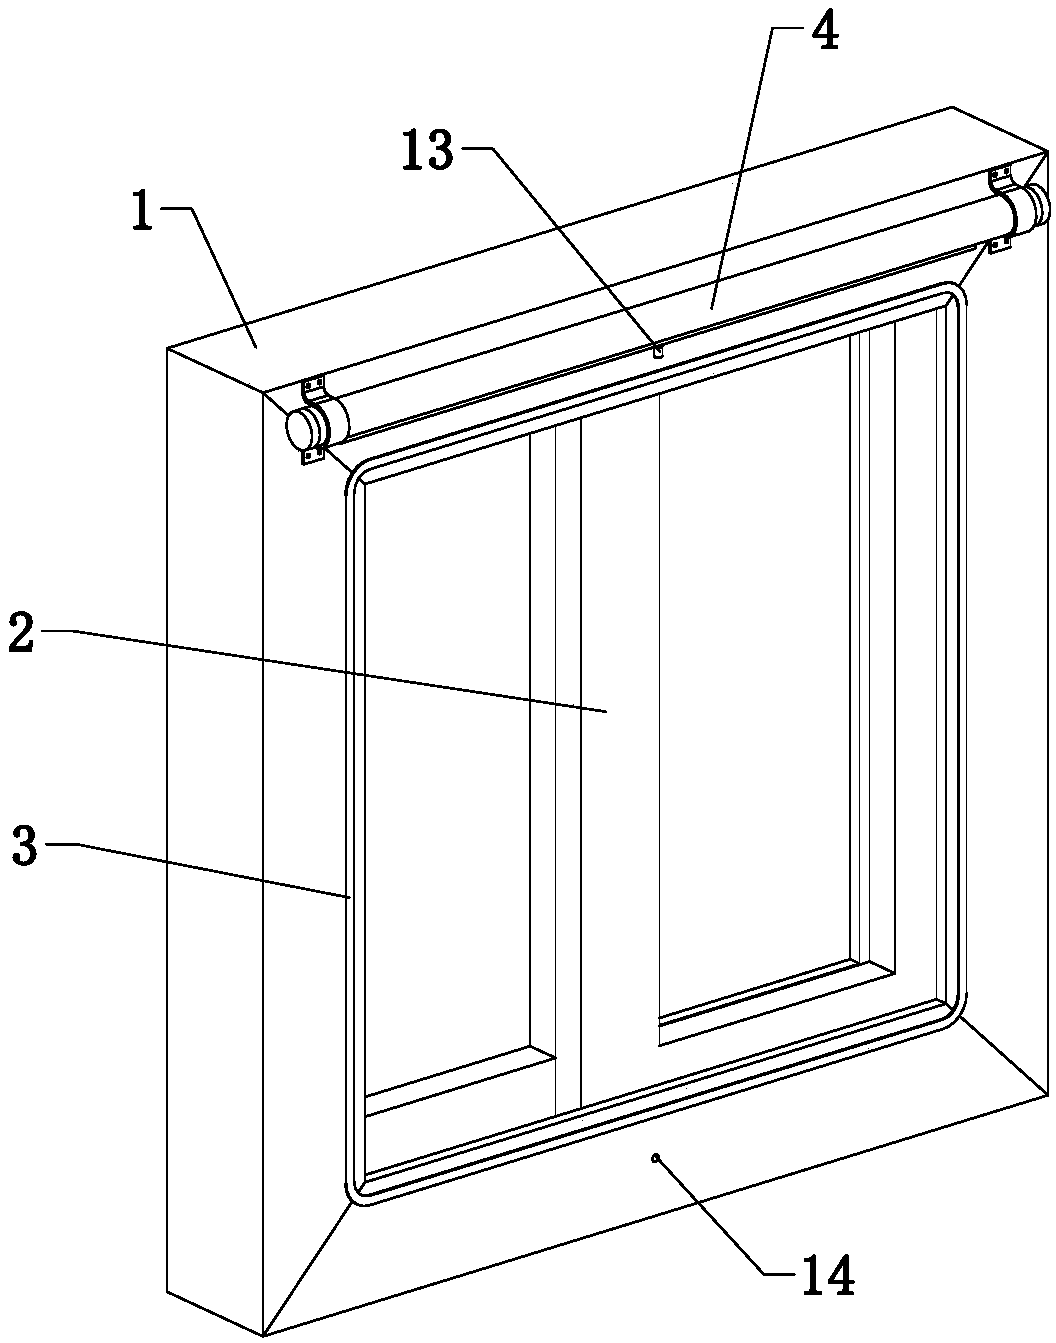 Magnetically closed anti-mosquito window